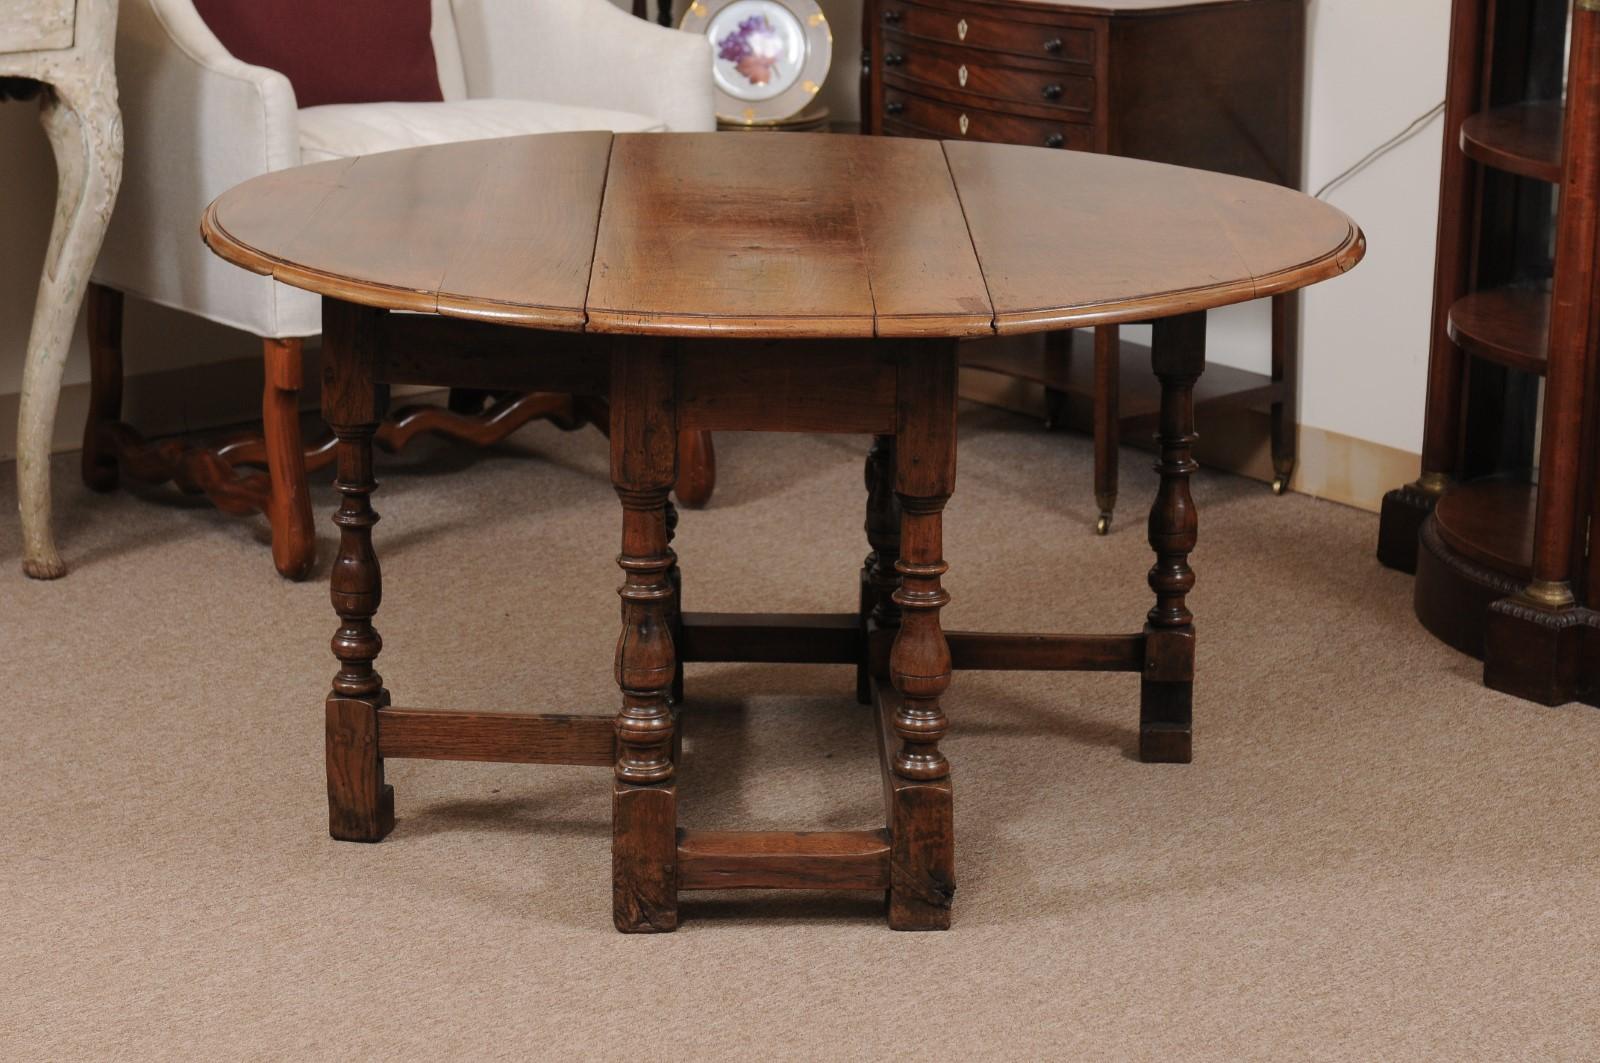 18th Century English Walnut Gate Leg Table with Drop Leaves & Turned Legs For Sale 4